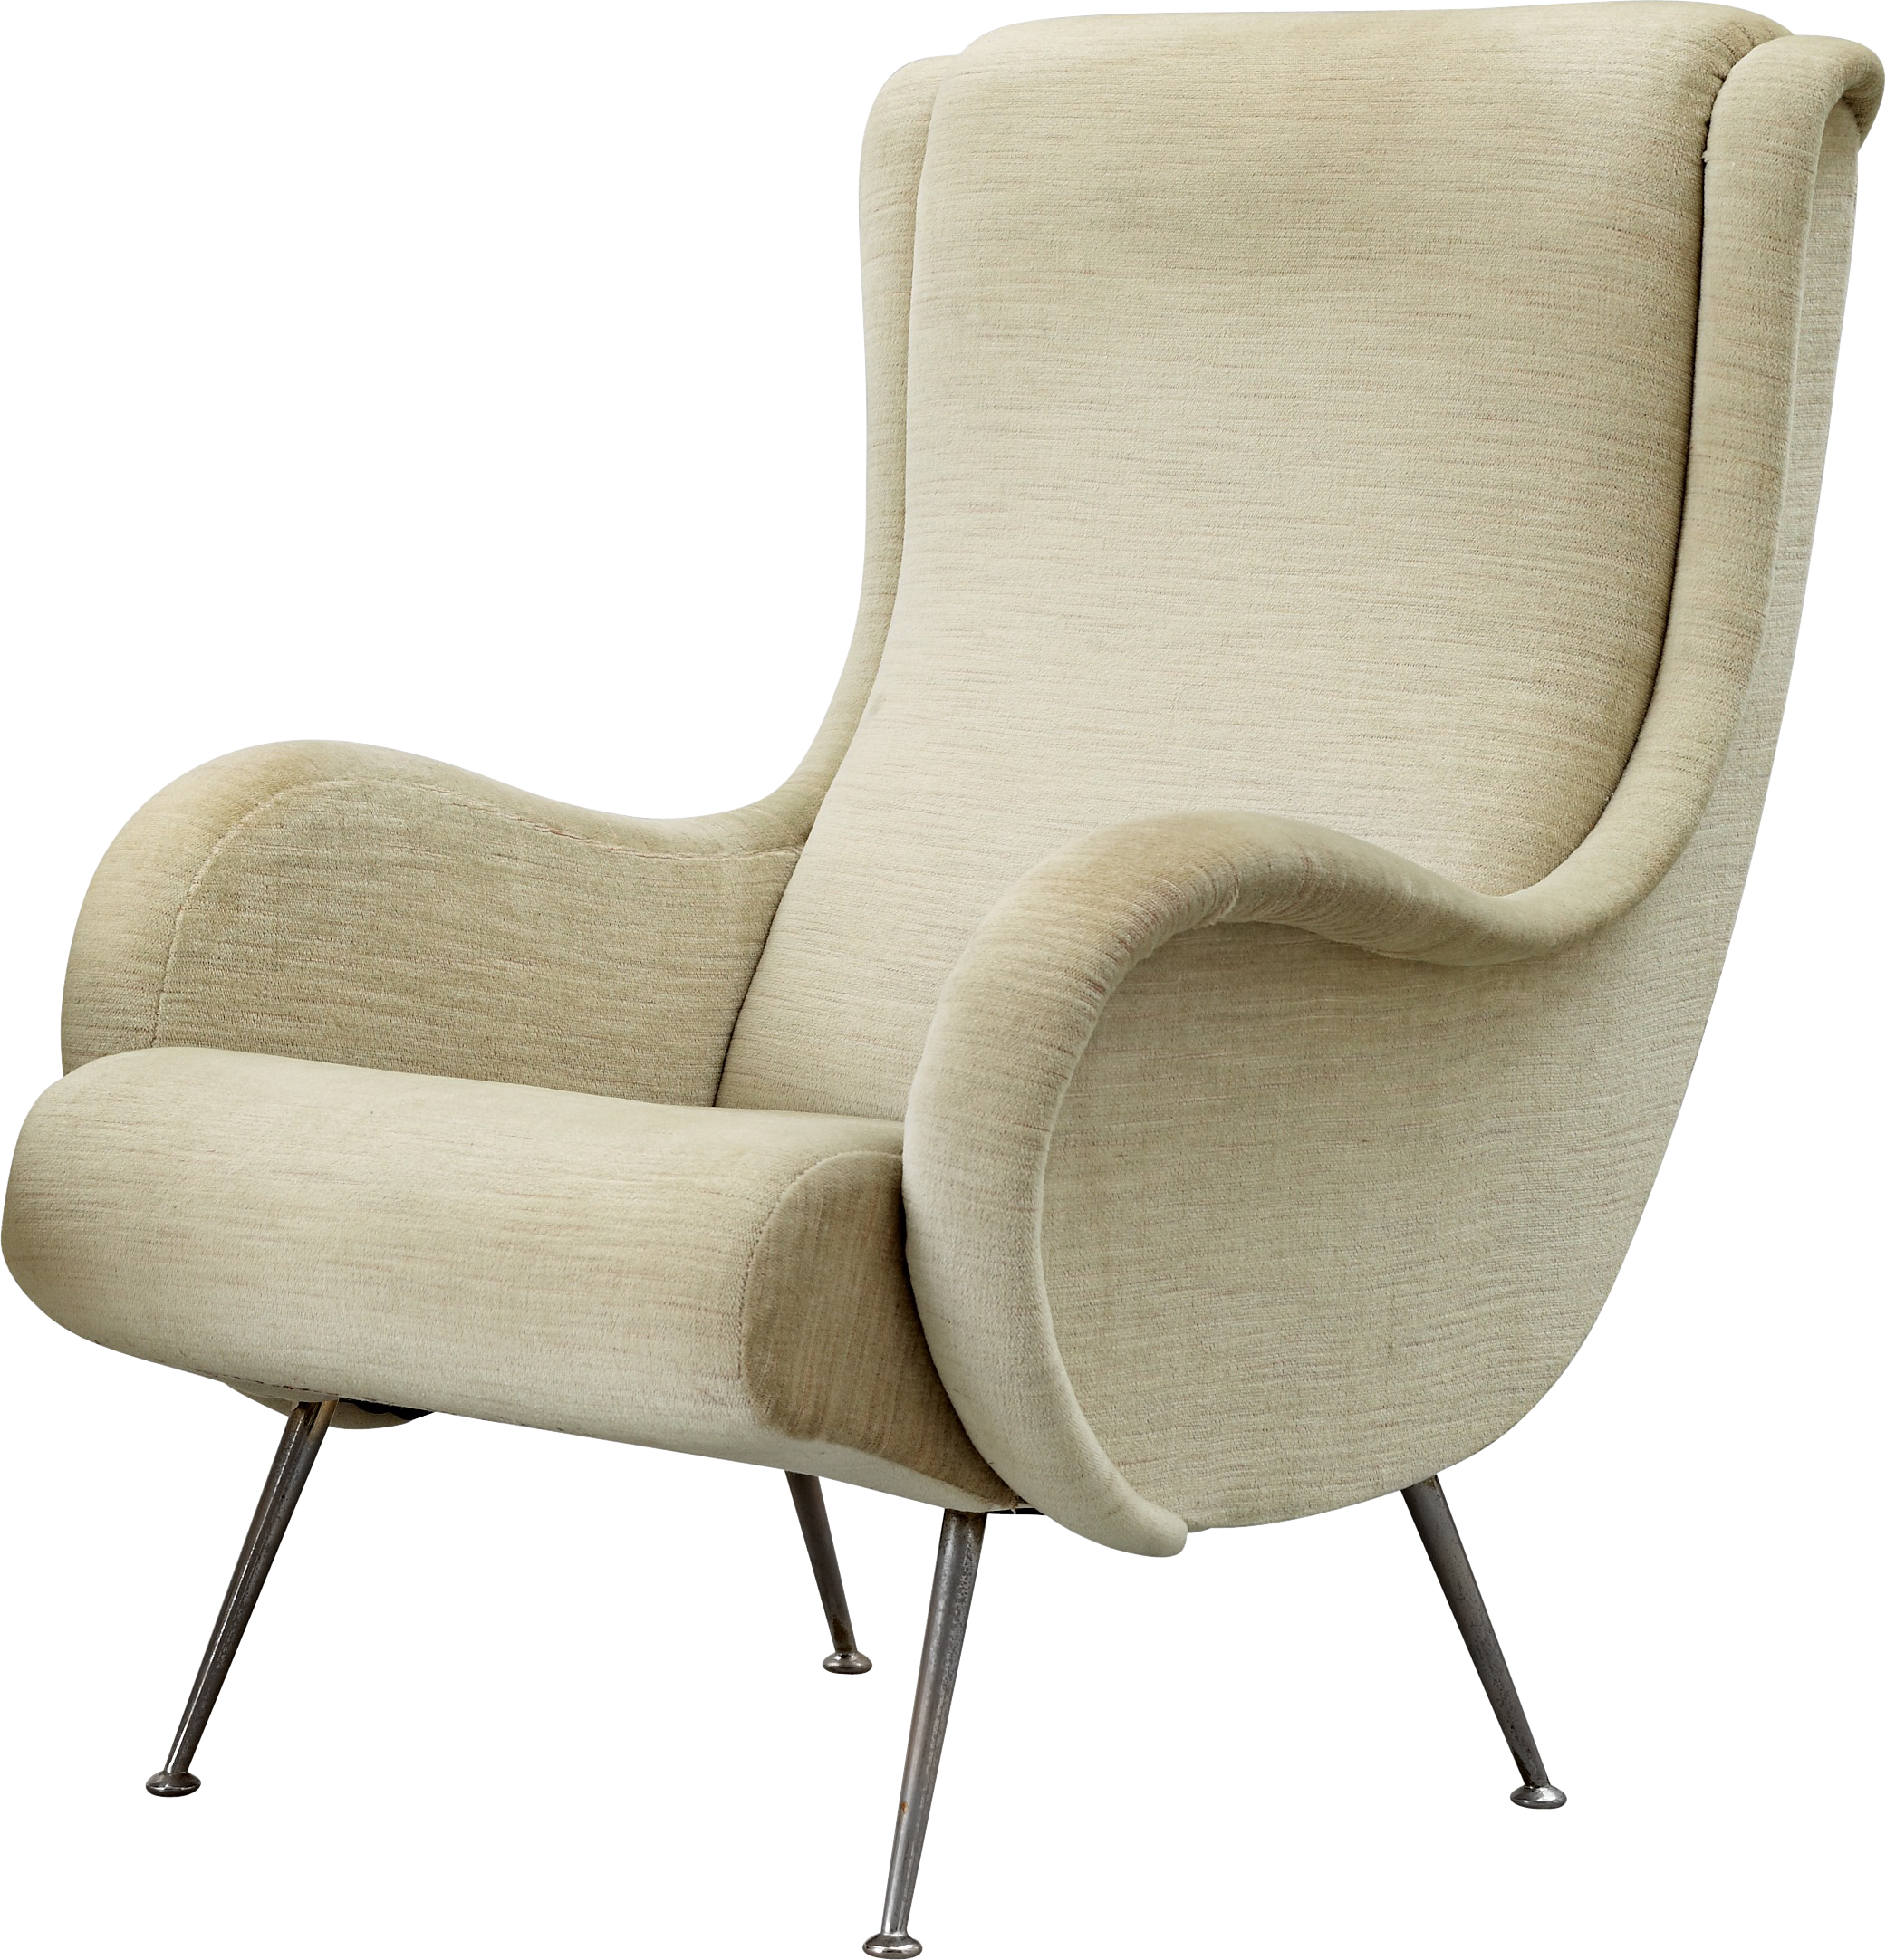 White Armchair Png Image - Armchair, Transparent background PNG HD thumbnail